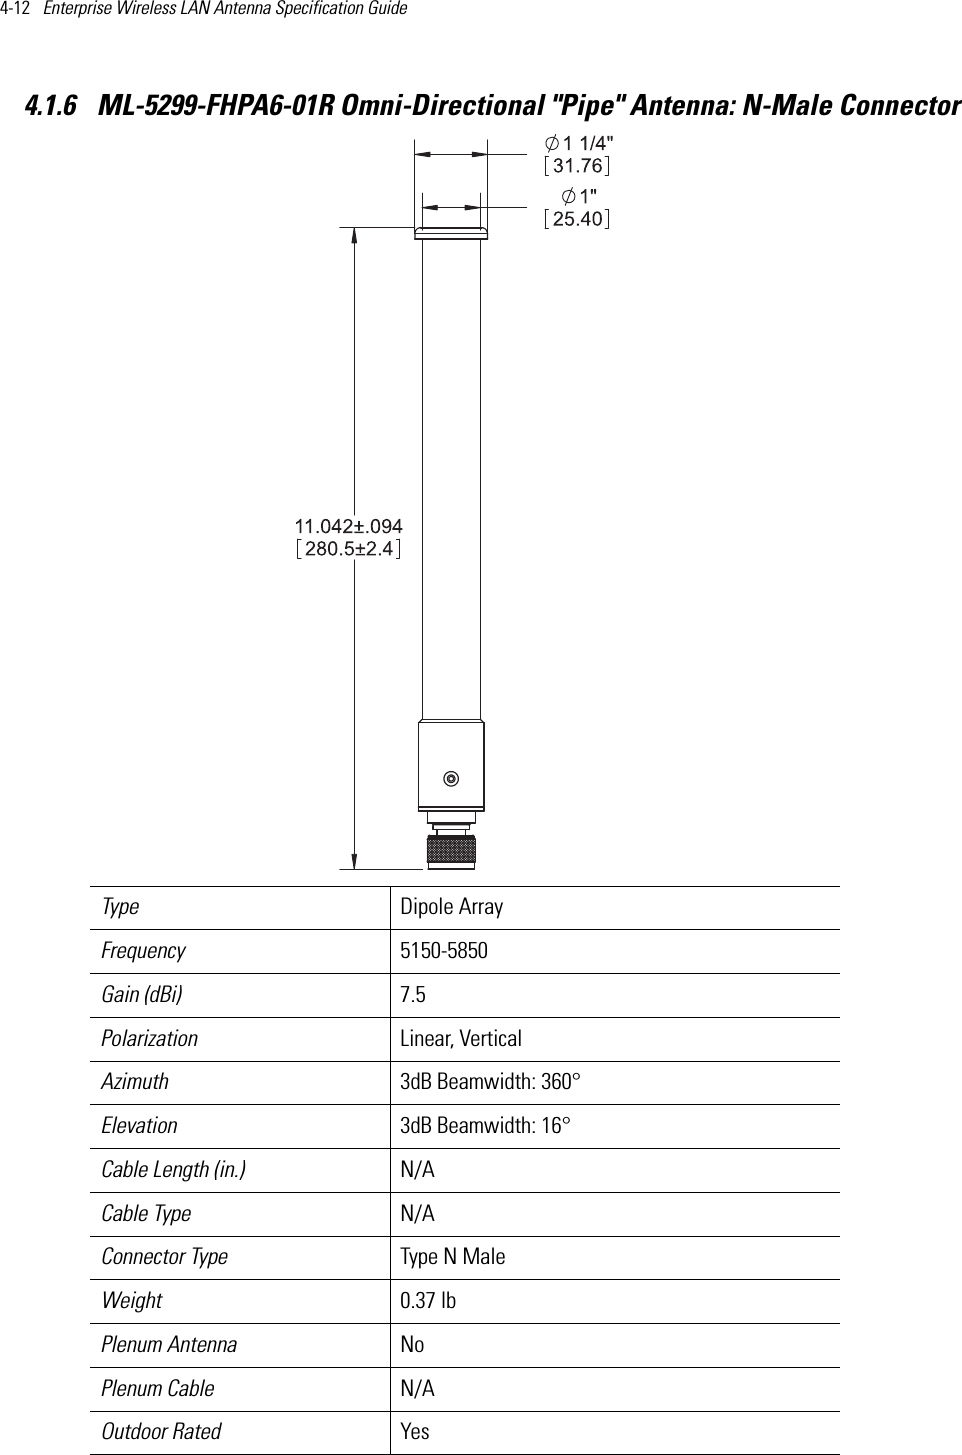 4-12   Enterprise Wireless LAN Antenna Specification Guide 4.1.6  ML-5299-FHPA6-01R Omni-Directional &quot;Pipe&quot; Antenna: N-Male Connector  Type Dipole ArrayFrequency 5150-5850Gain (dBi) 7.5Polarization Linear, VerticalAzimuth 3dB Beamwidth: 360°Elevation 3dB Beamwidth: 16°Cable Length (in.) N/ACable Type N/AConnector Type Type N MaleWeight 0.37 lbPlenum Antenna NoPlenum Cable N/AOutdoor Rated Yes